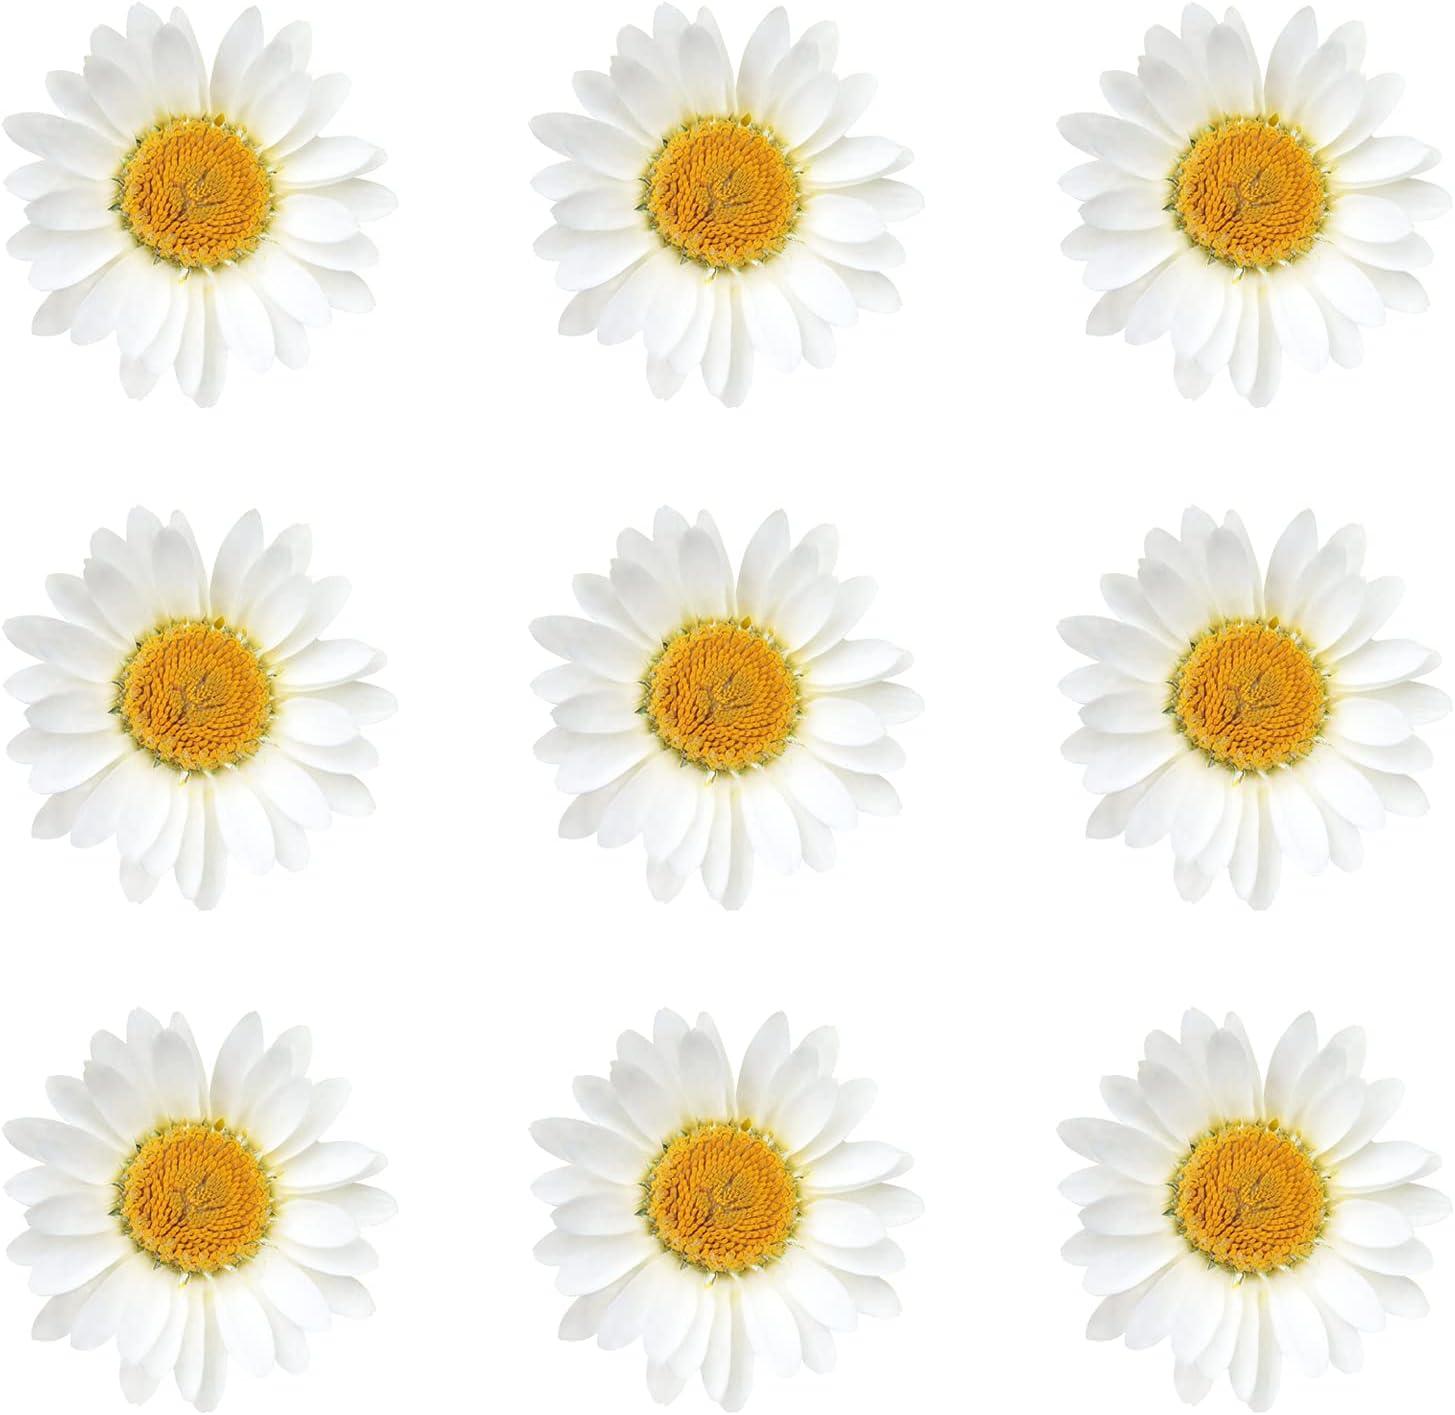 120 Pieces Real Dried Daisy Flowers Natural Dried Daisies DIY Dry